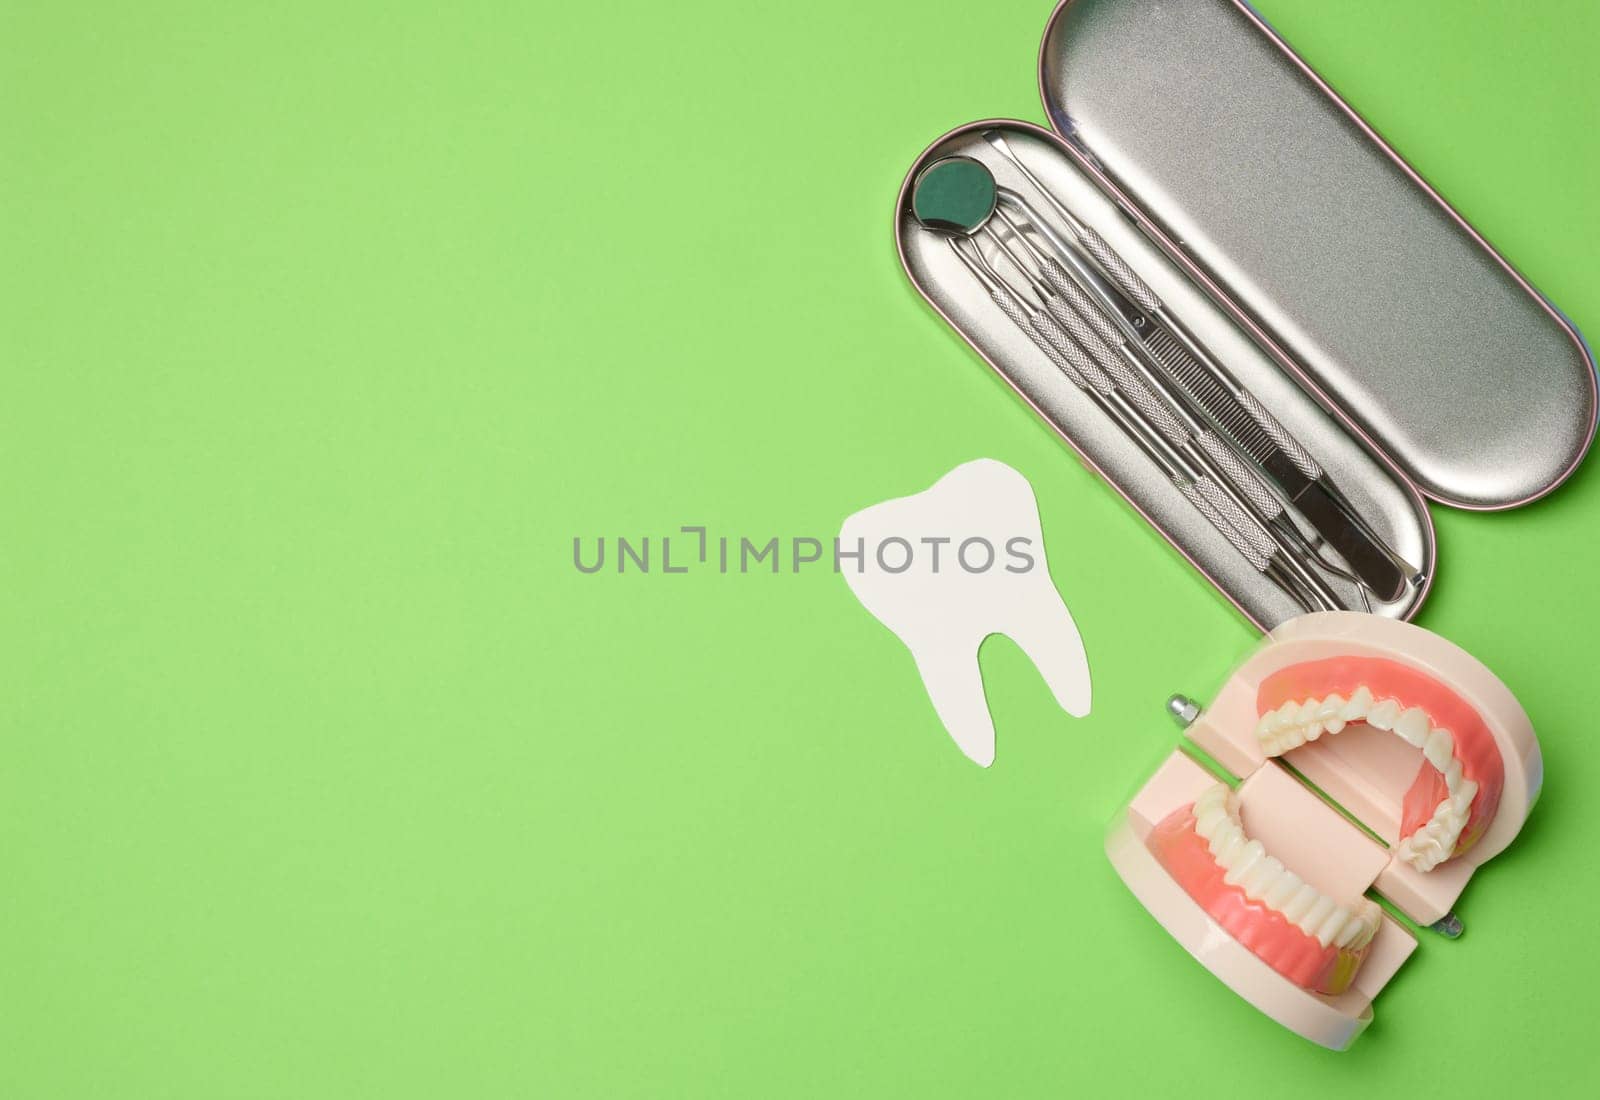 Metal dentist tools, plastic jaw model with white teeth on a green background, top view